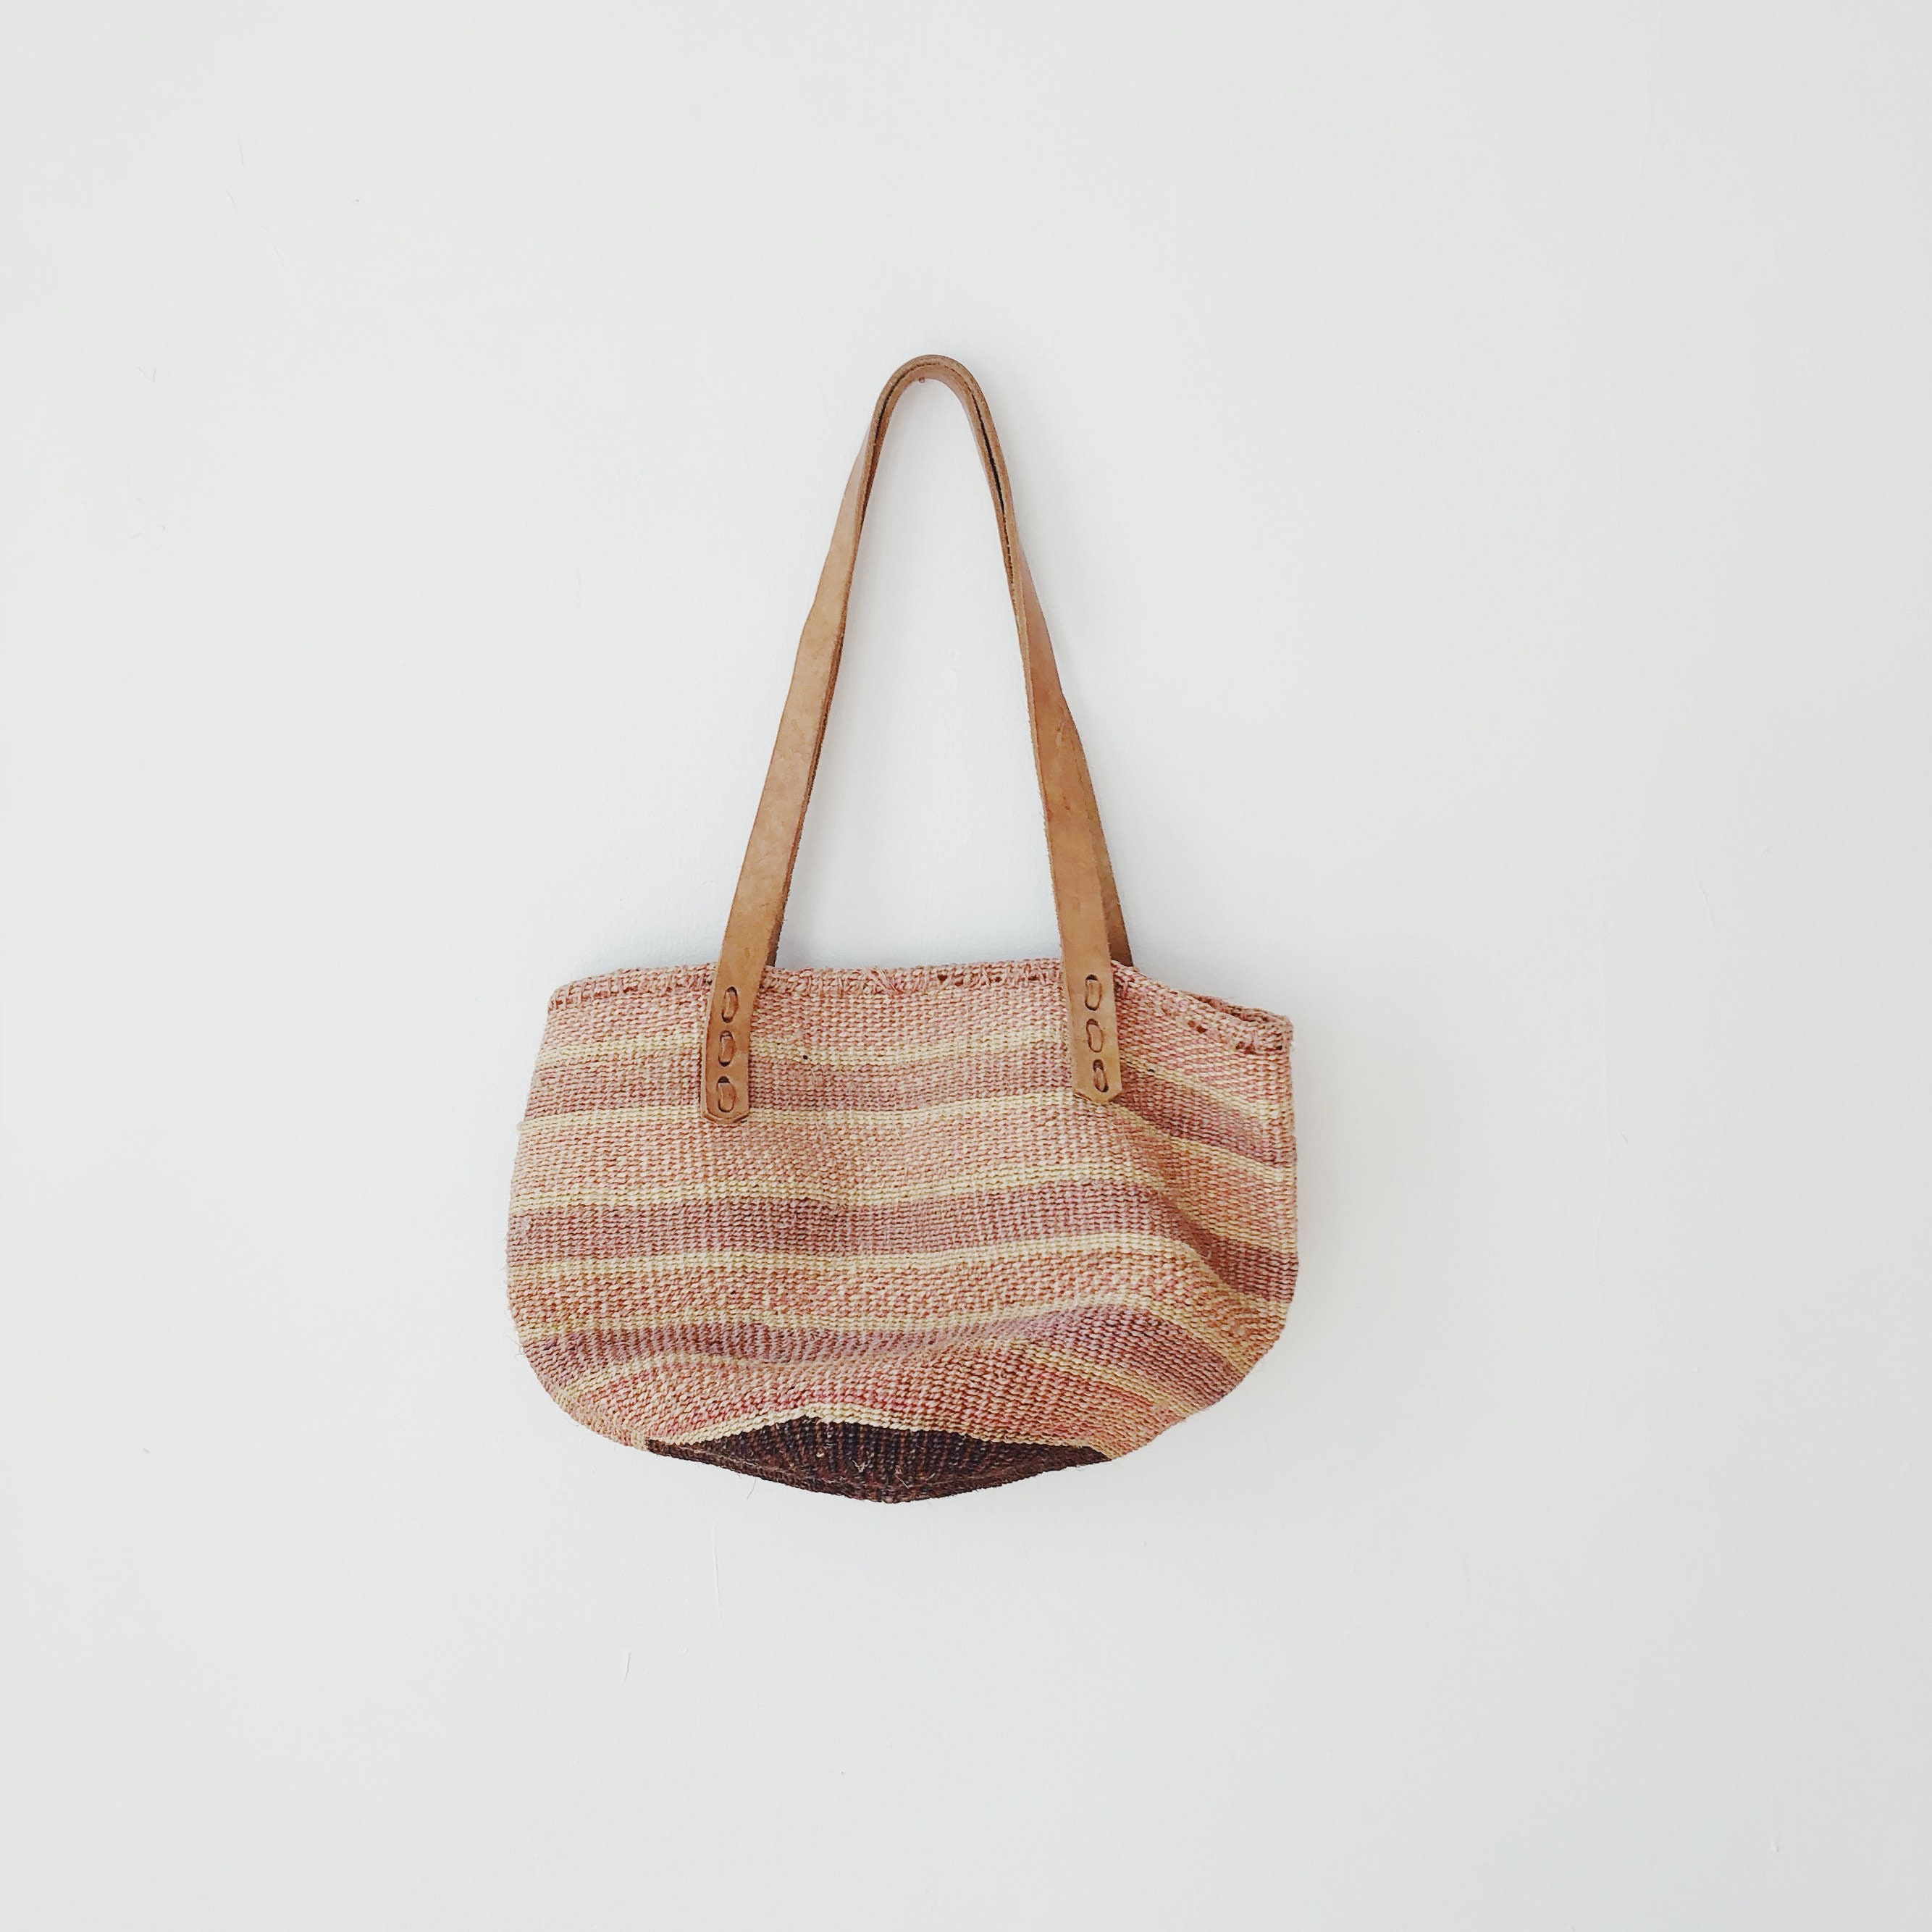 Vintage sisal tote with leather straps